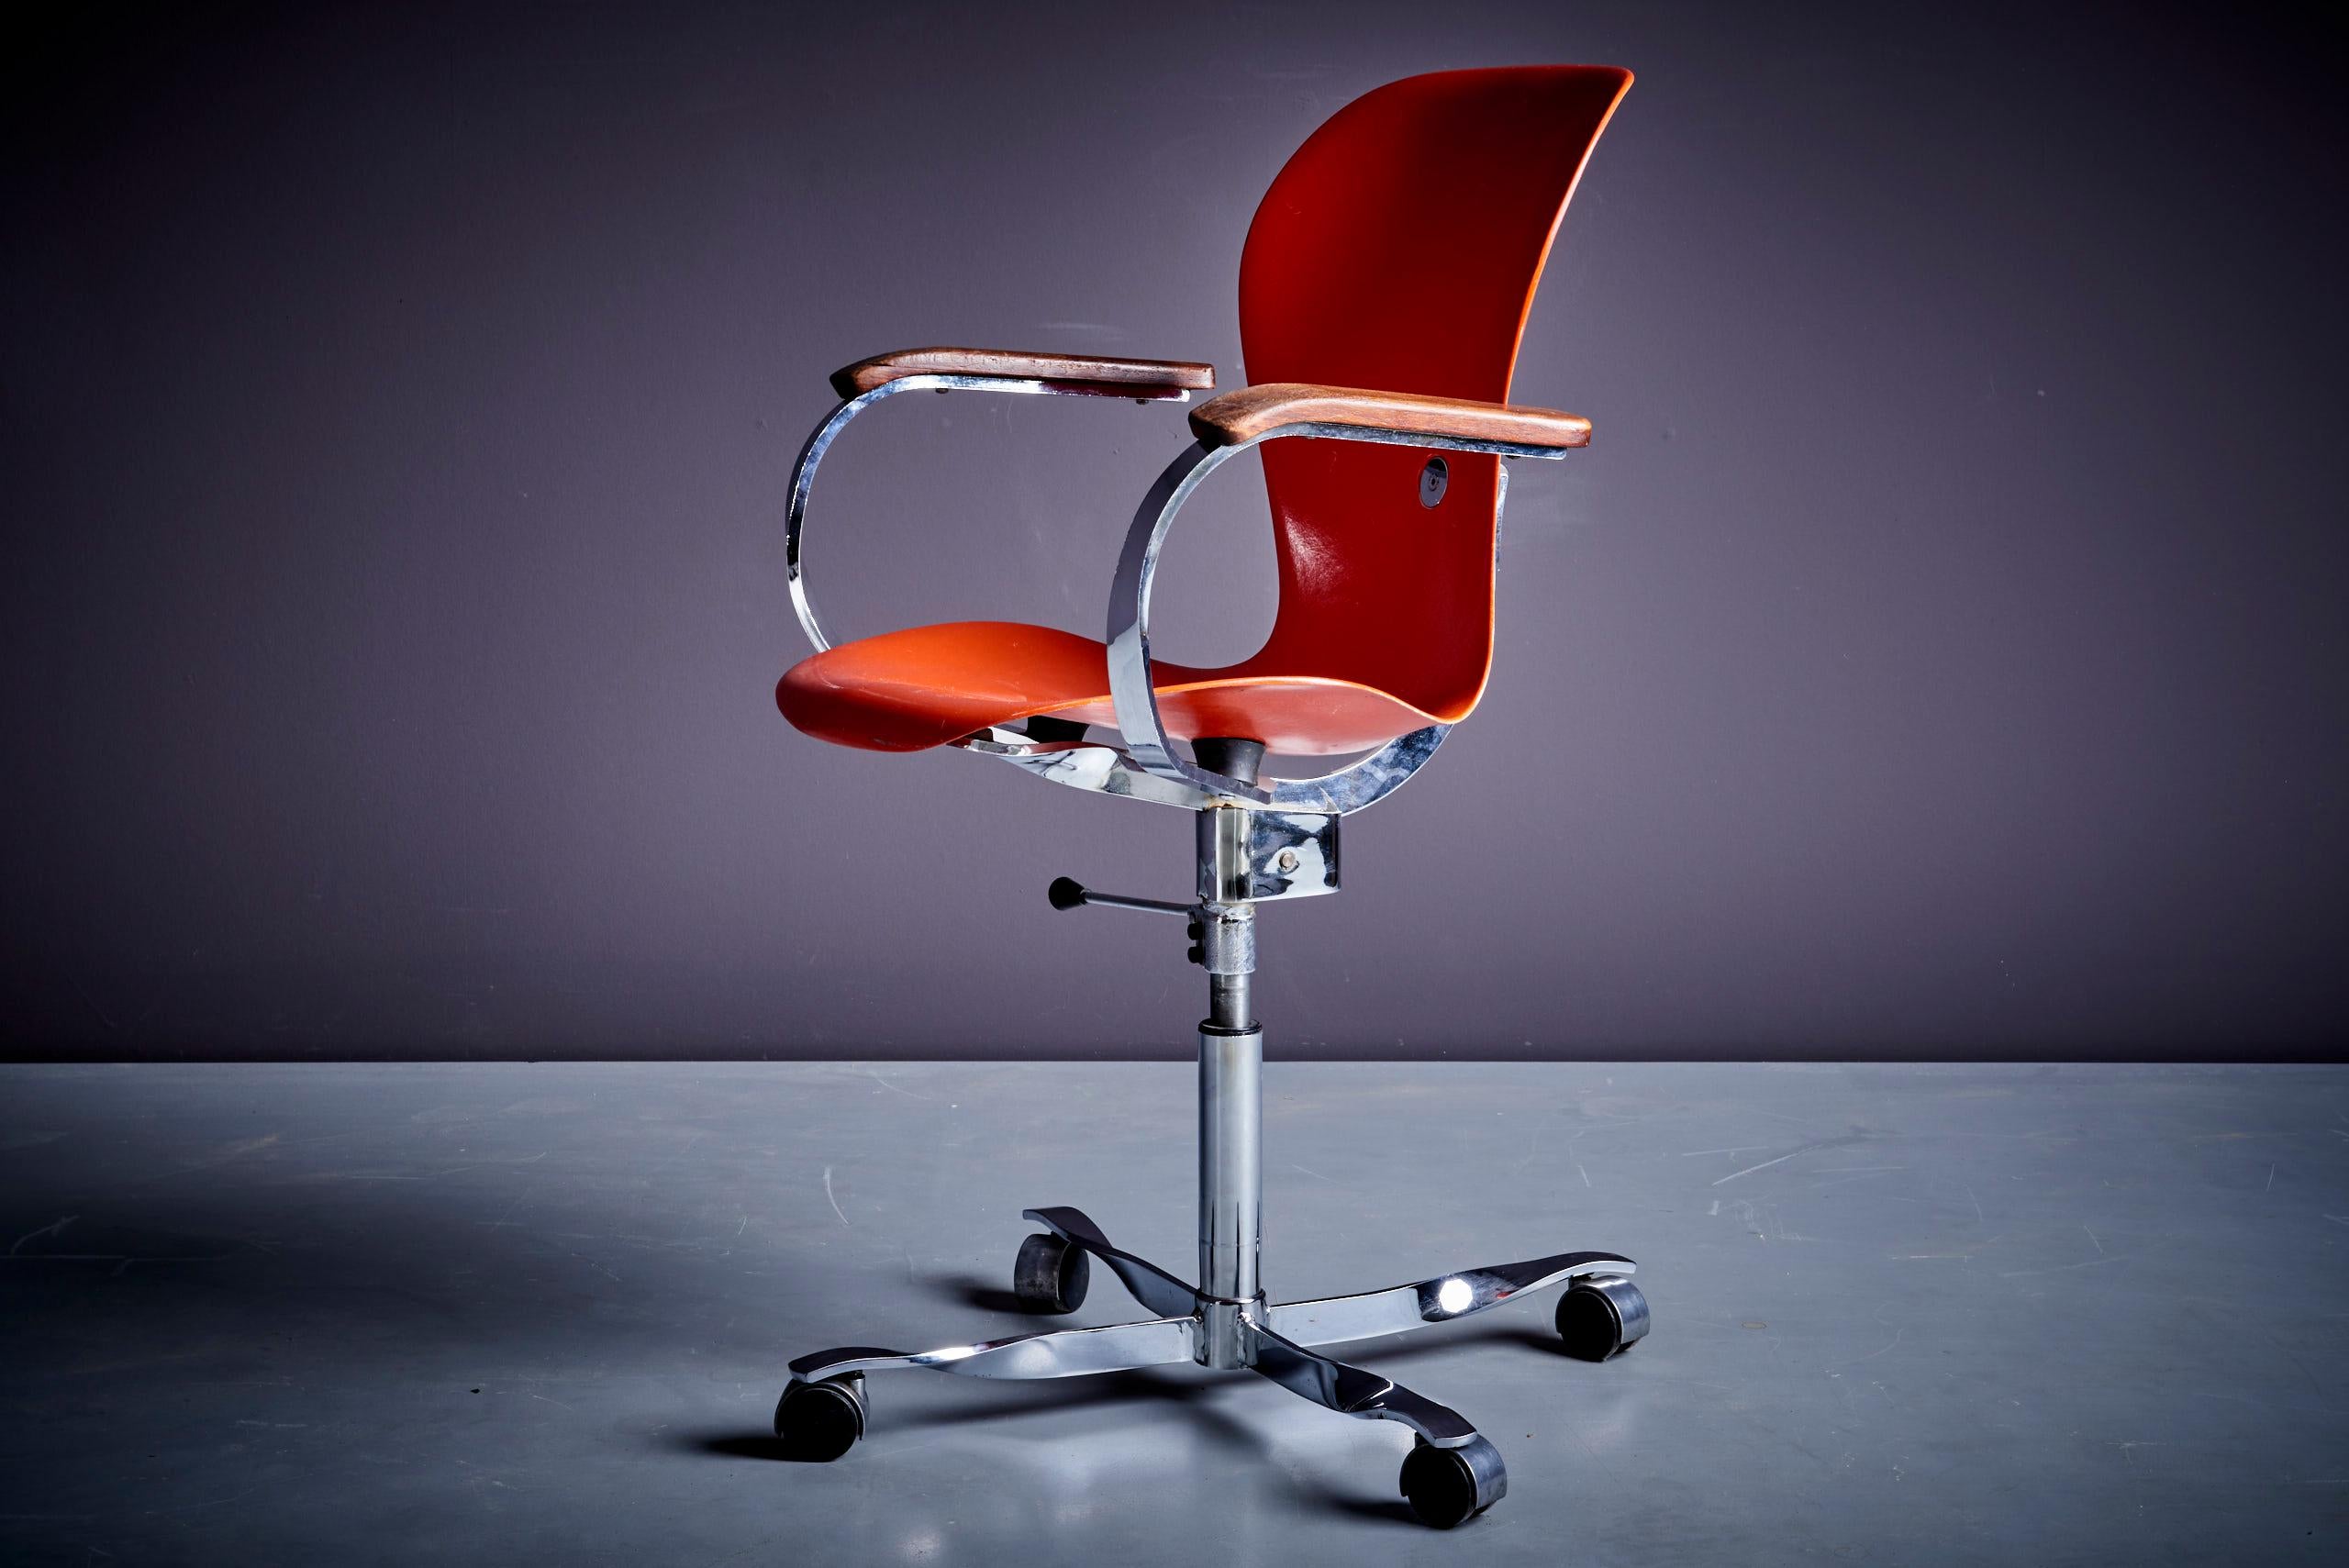 Mid-Century Modern Desk Chair by Gideon Kramer for Seattle Space Tower, US, 1962 For Sale